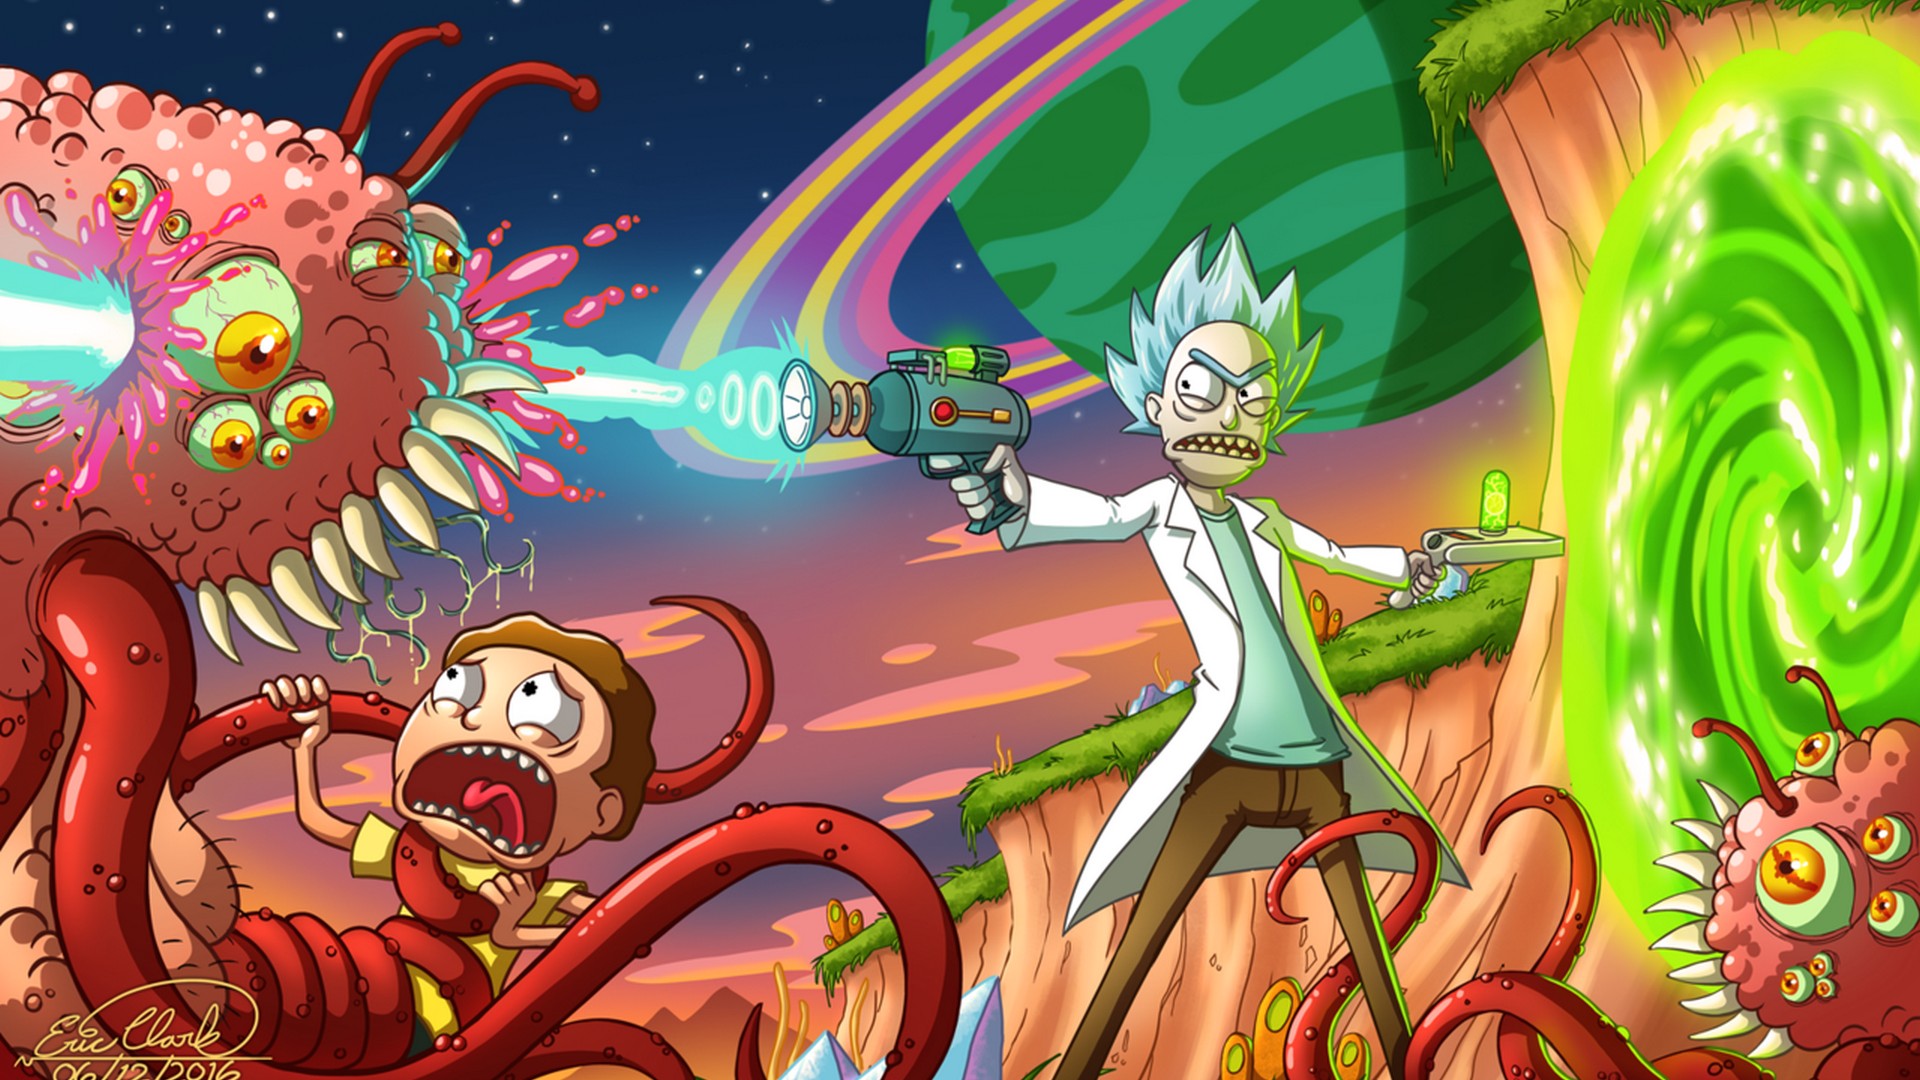 Wallpaper Rick and Morty Art with image resolution 1920x1080 pixel. You can use this wallpaper as background for your desktop Computer Screensavers, Android or iPhone smartphones